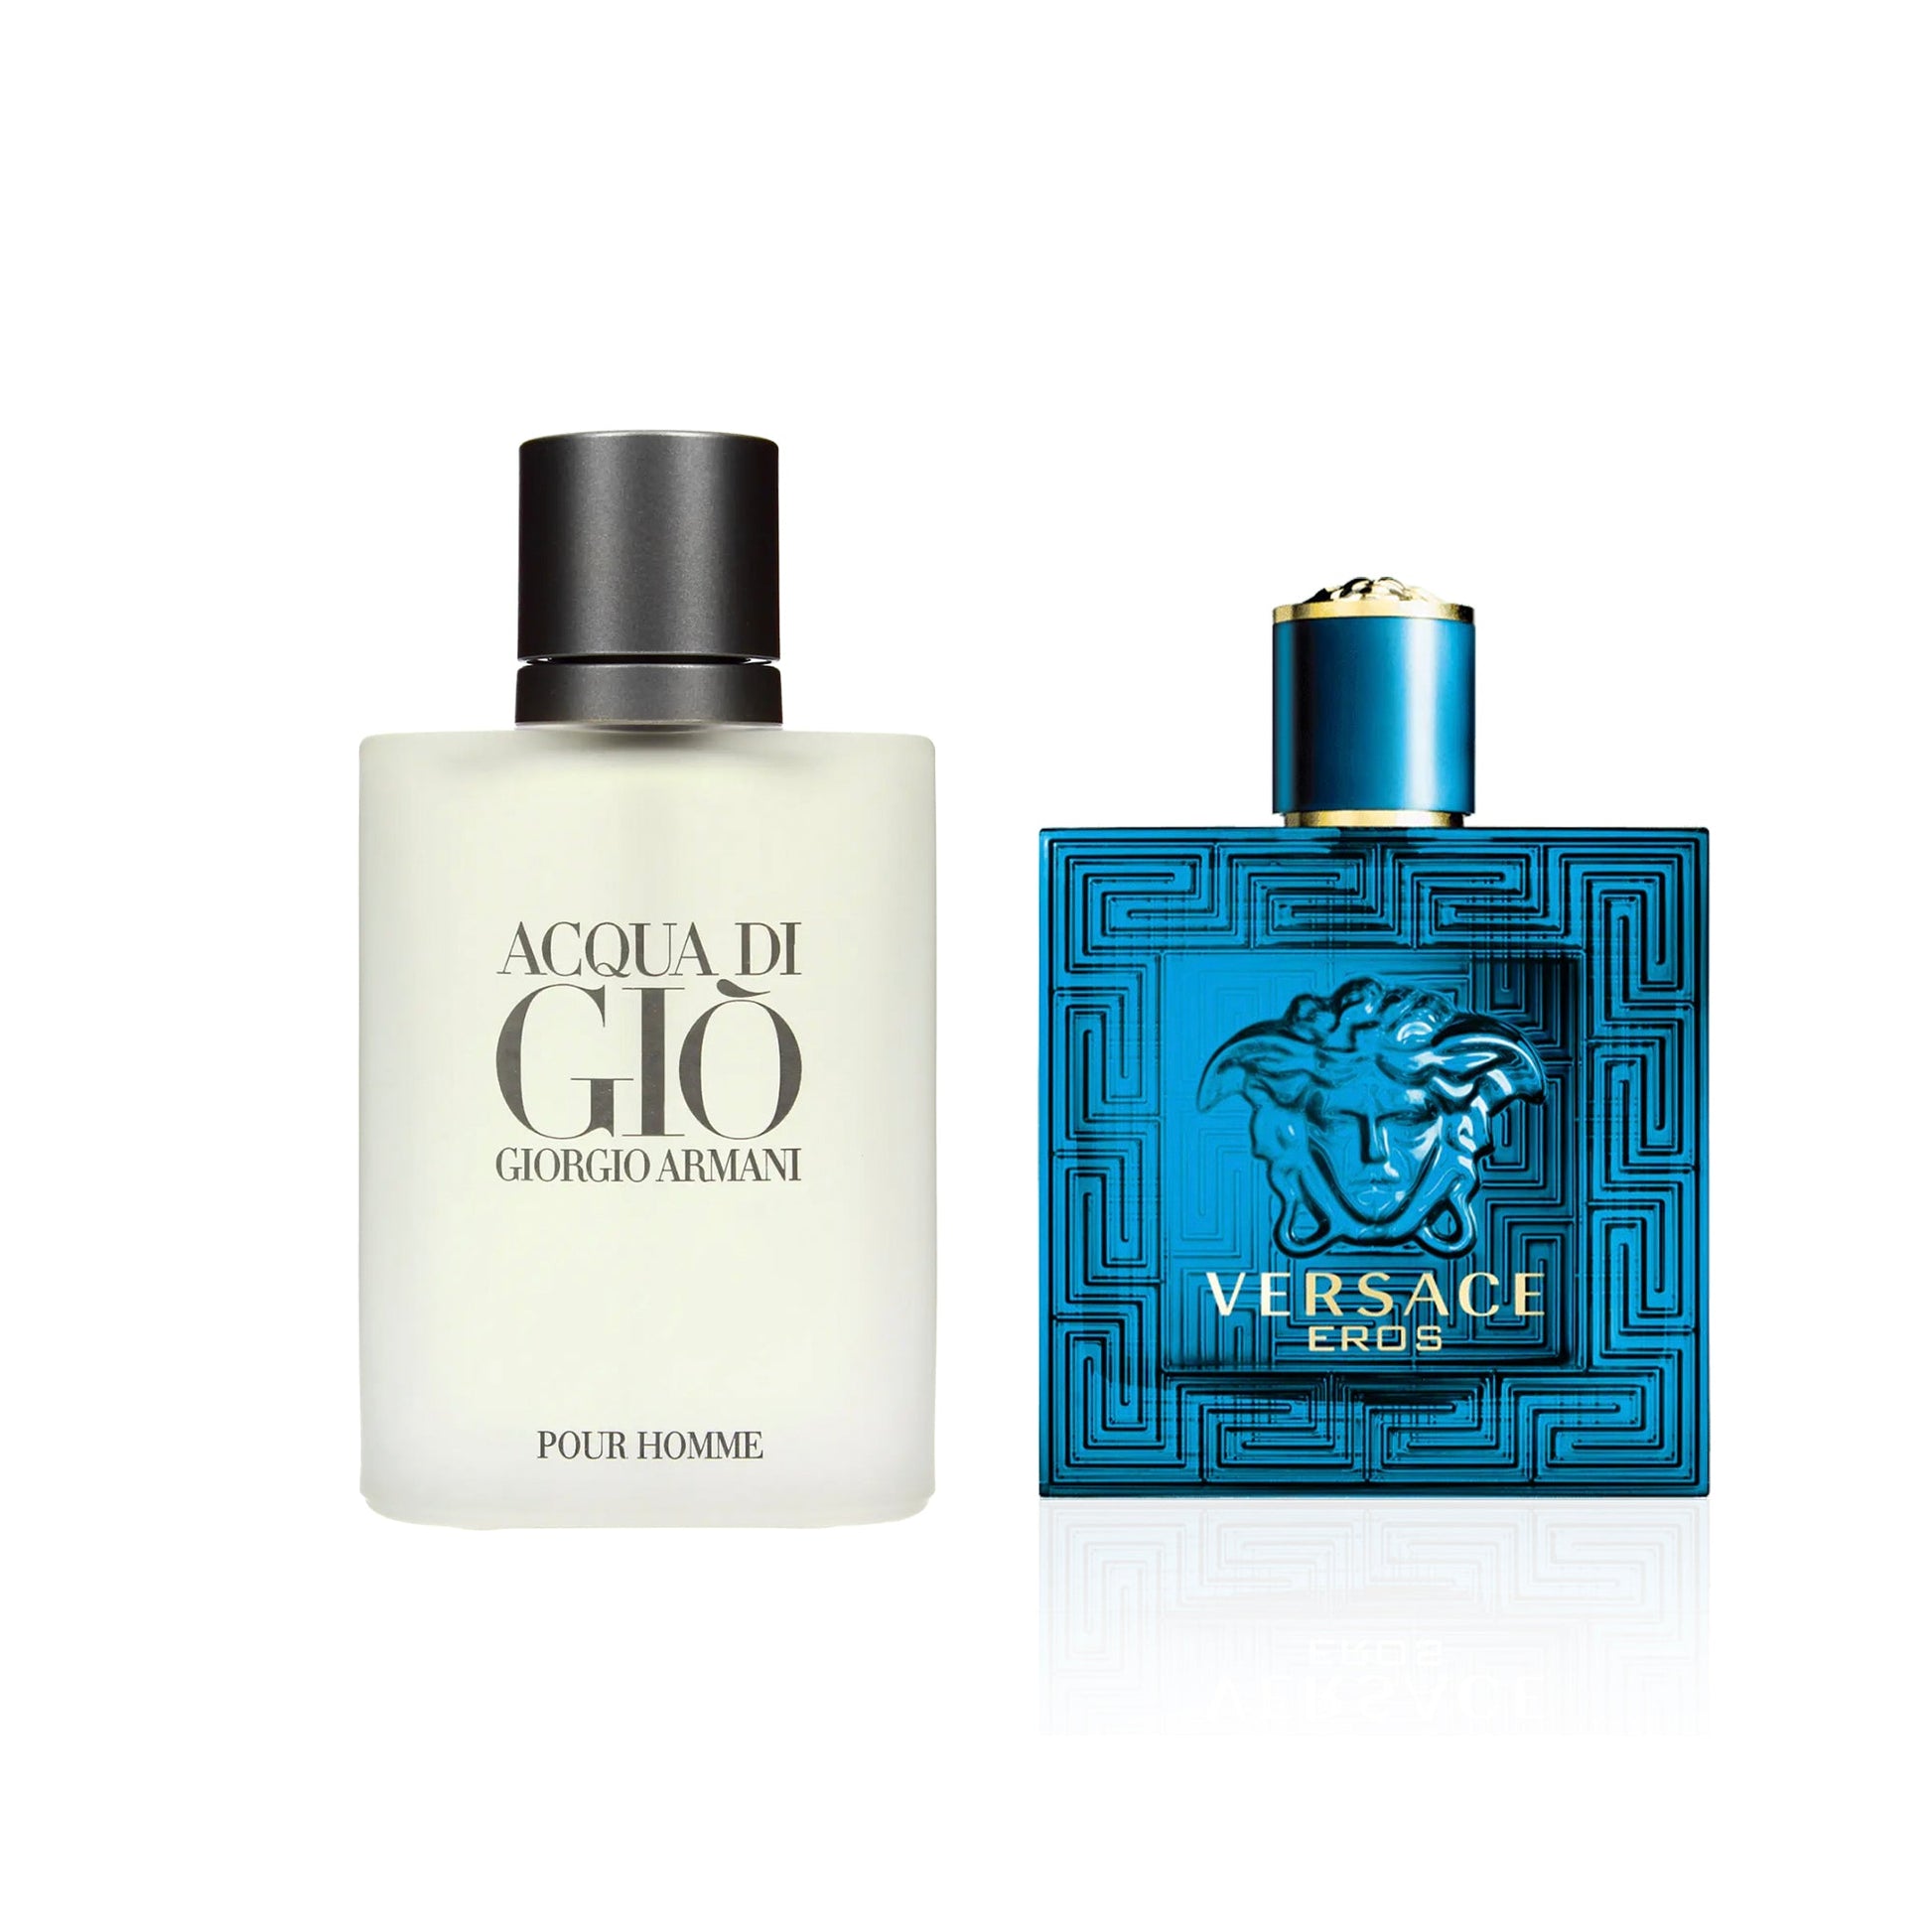 Bundle for Men: Acqua di Gio by Armani and Eros by Versace, Product image 1